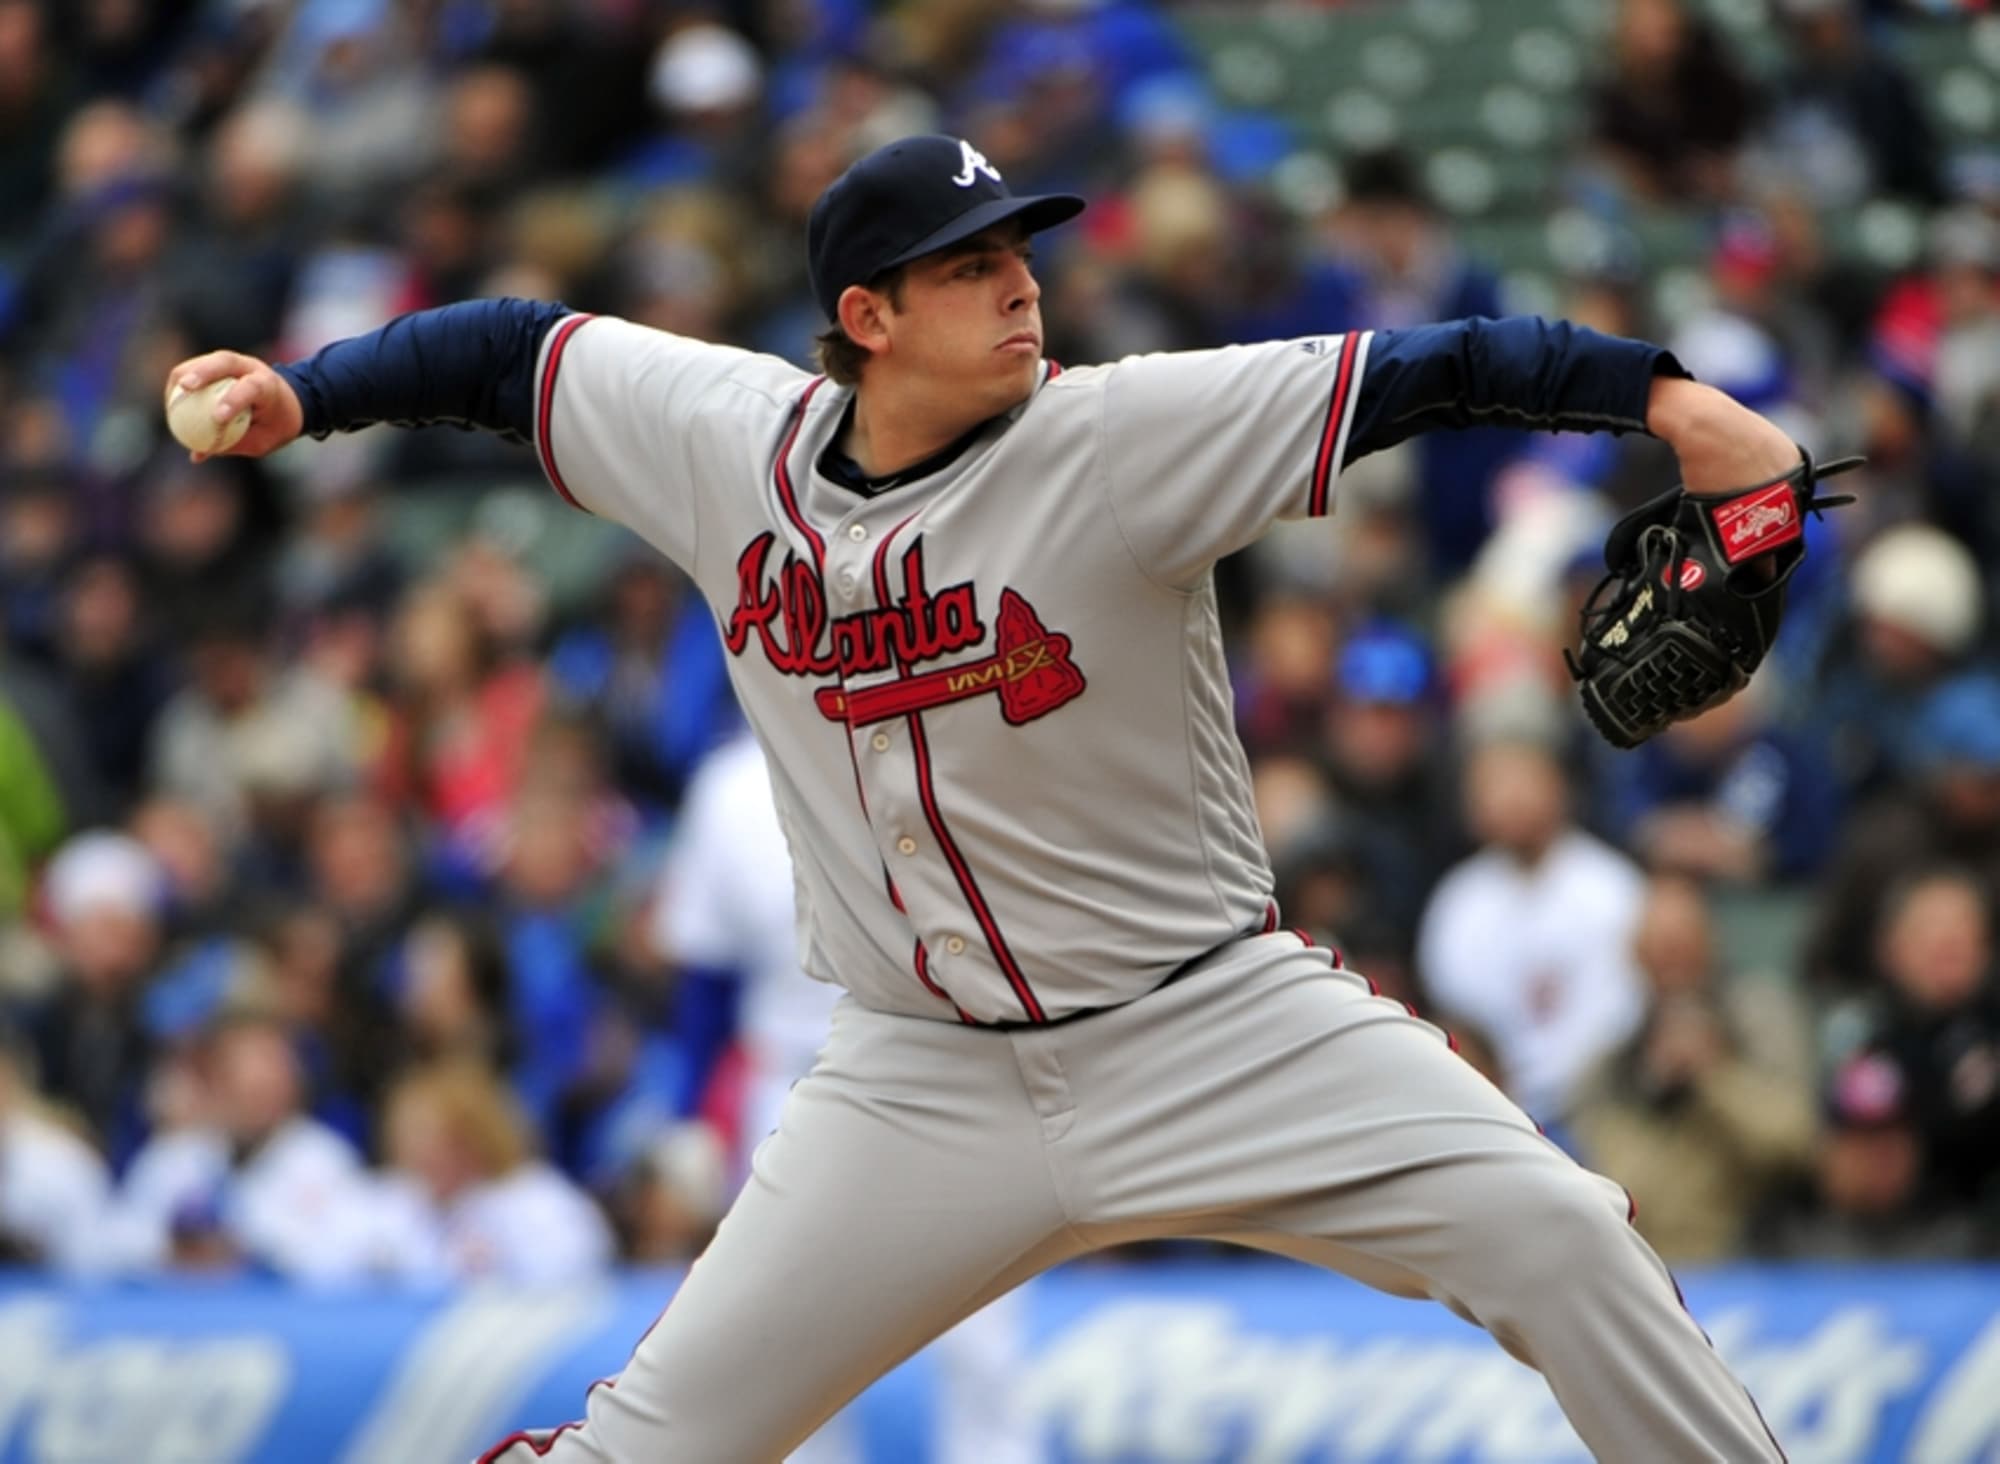 The Atlanta Braves have one of many young pitchers in MLB